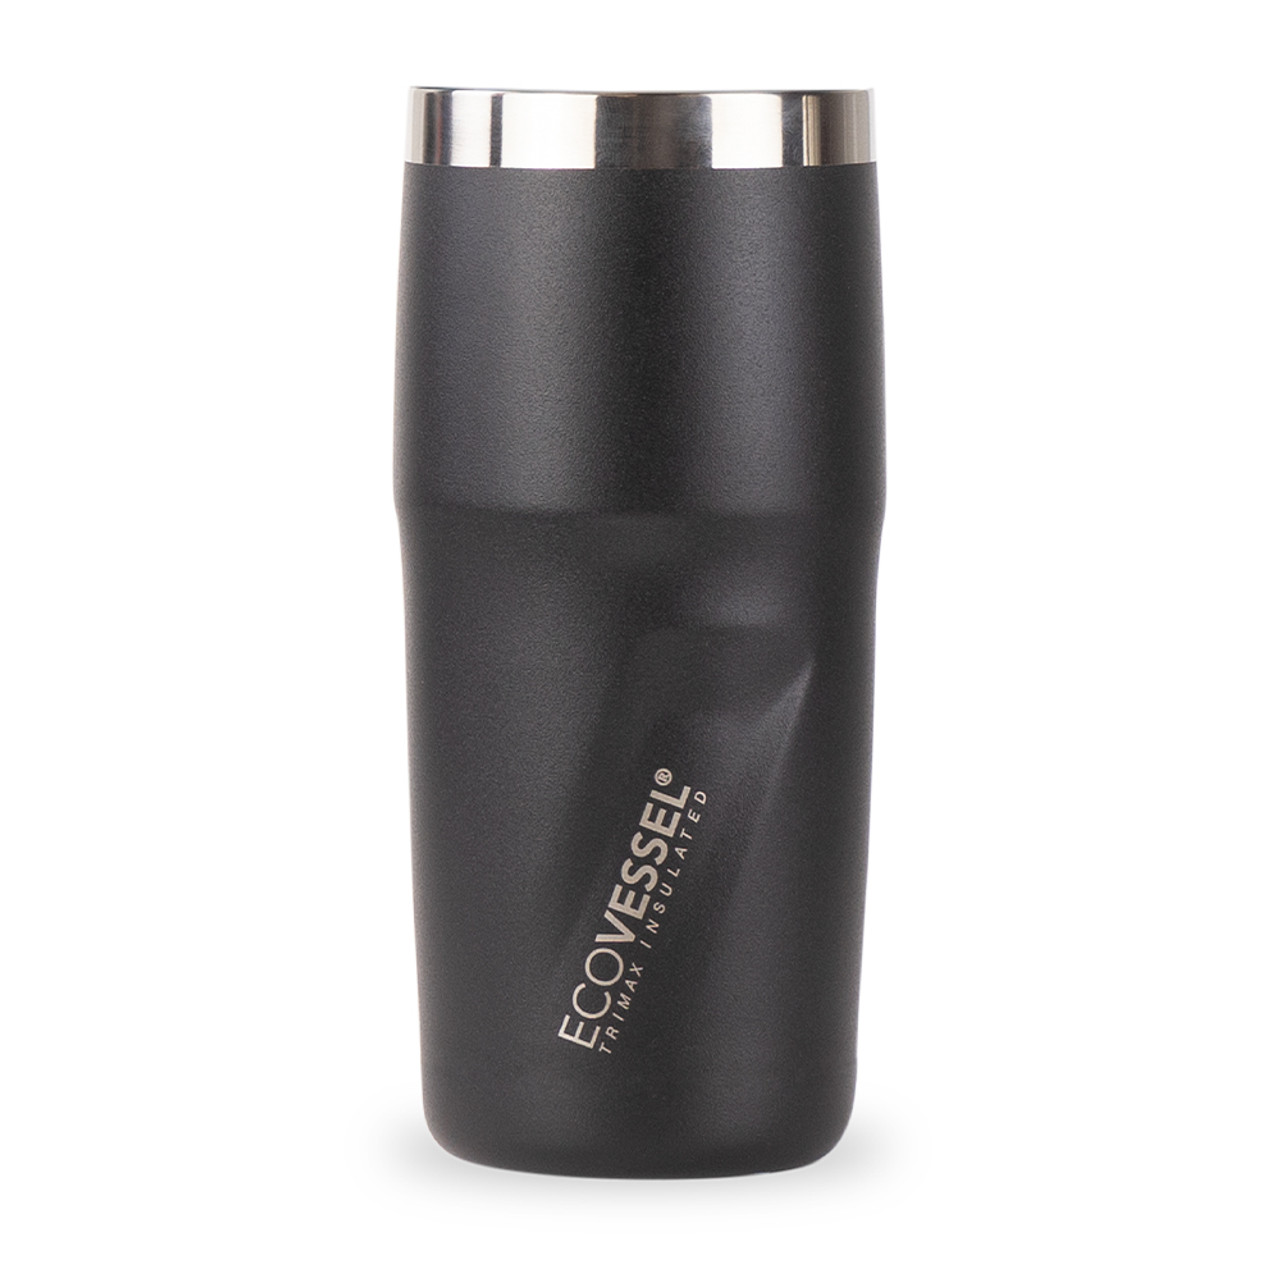 16 oz EcoVessel METRO Insulated Stainless Steel Tumbler